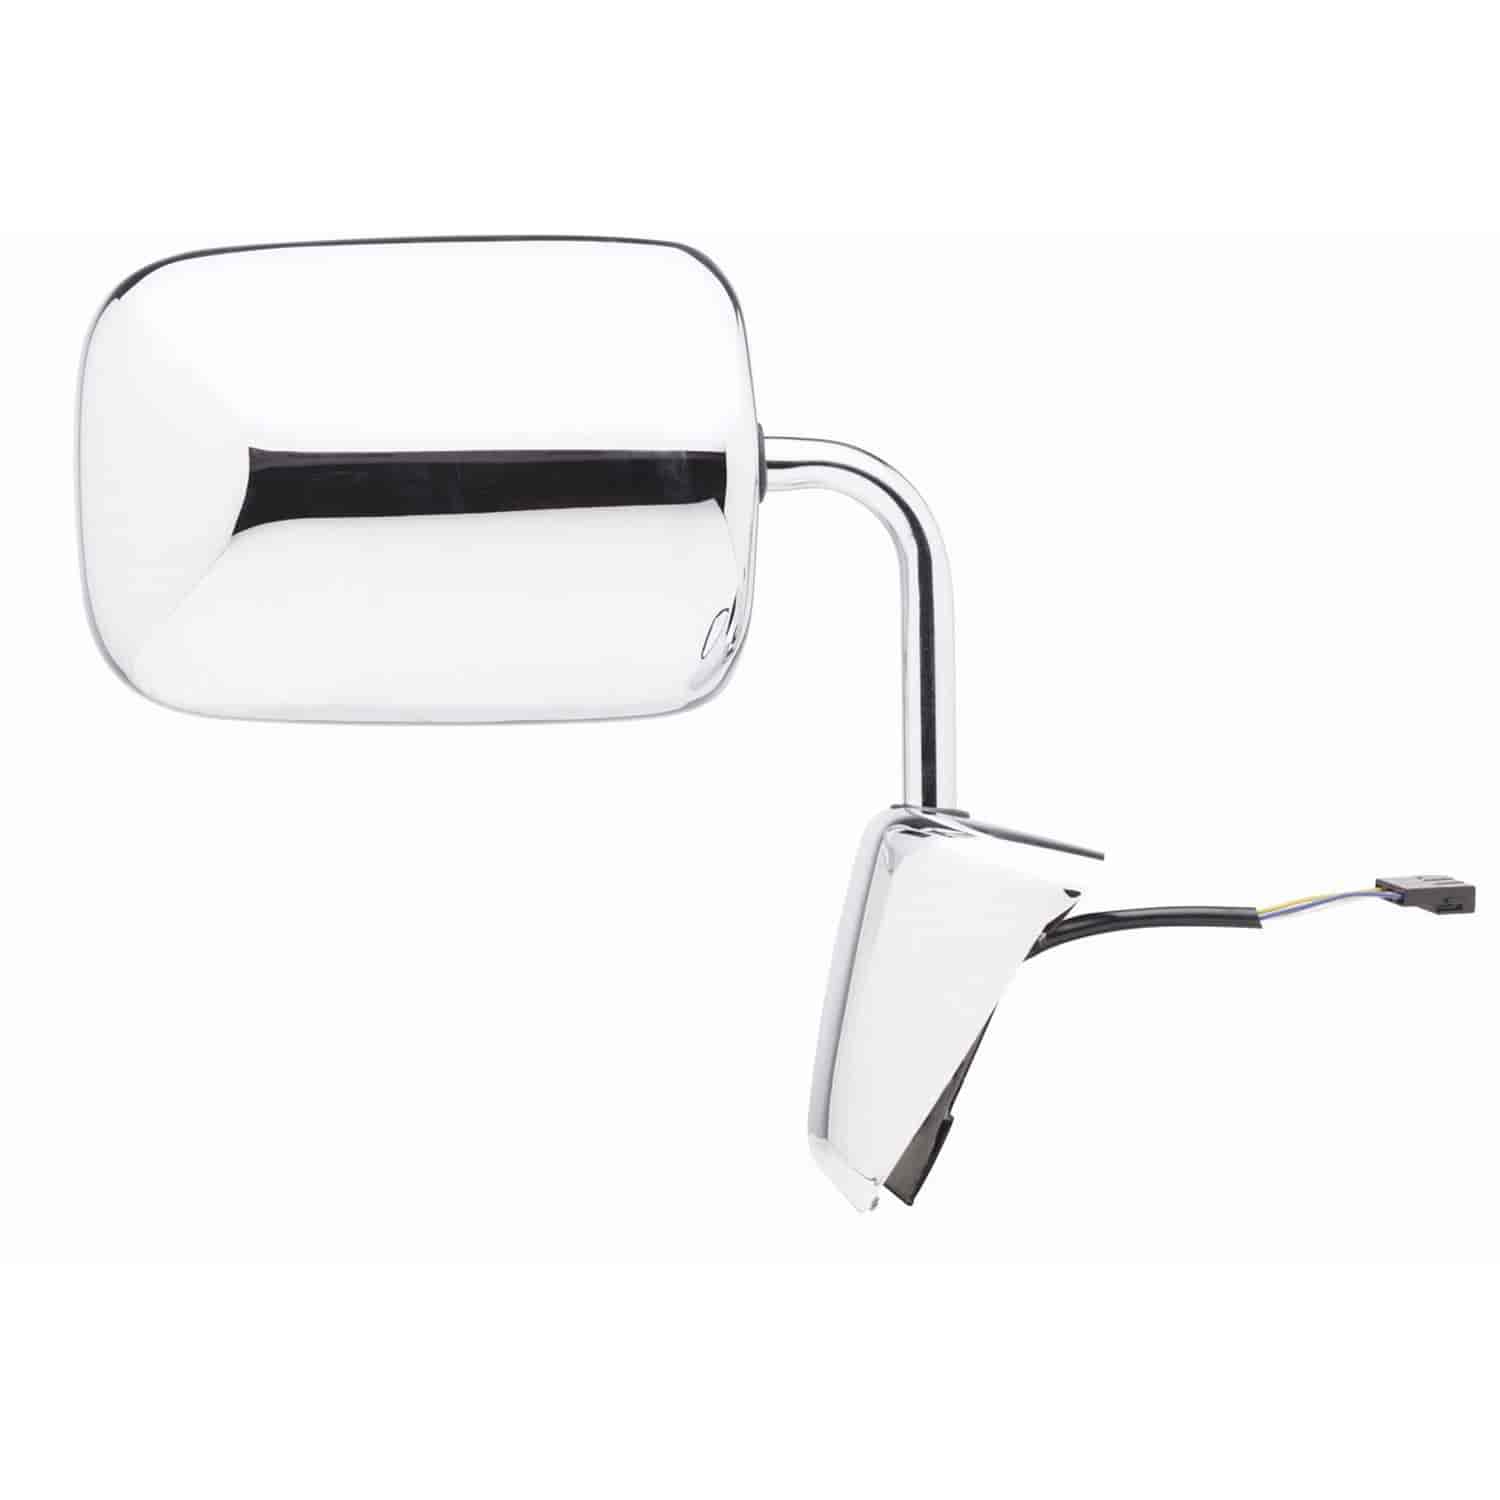 OEM Style Replacement mirror for 88-93 Dodge Pick Up/Ram Charger 6x9 option passenger side mirror te